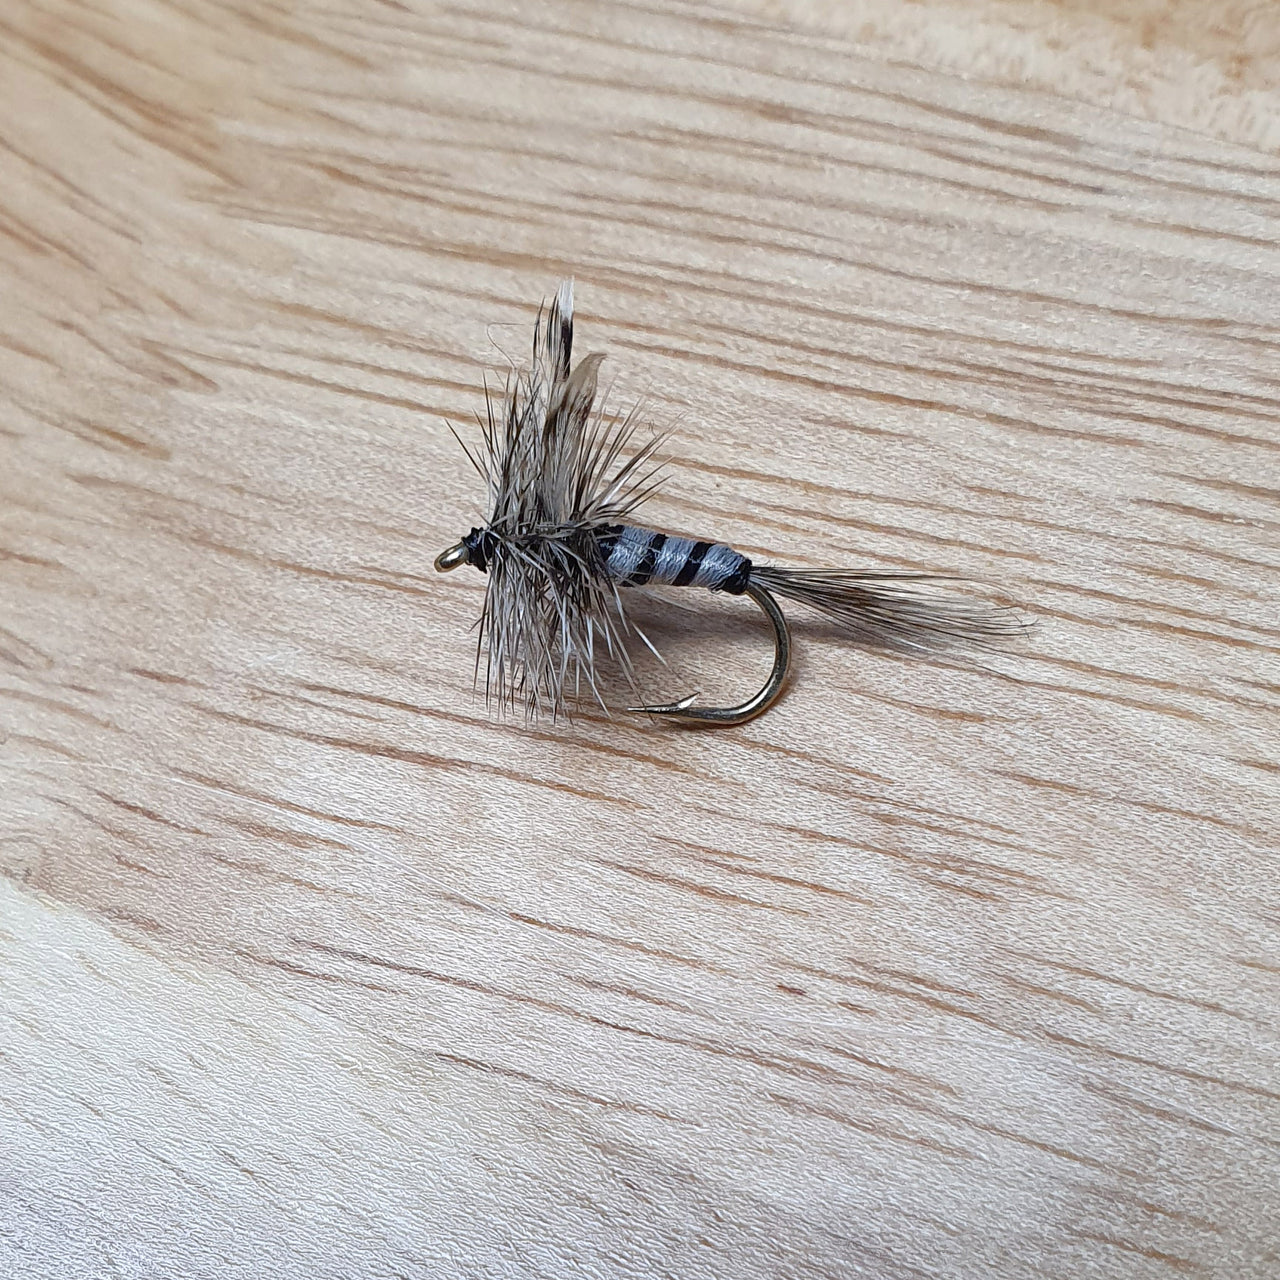 Mosquito fly